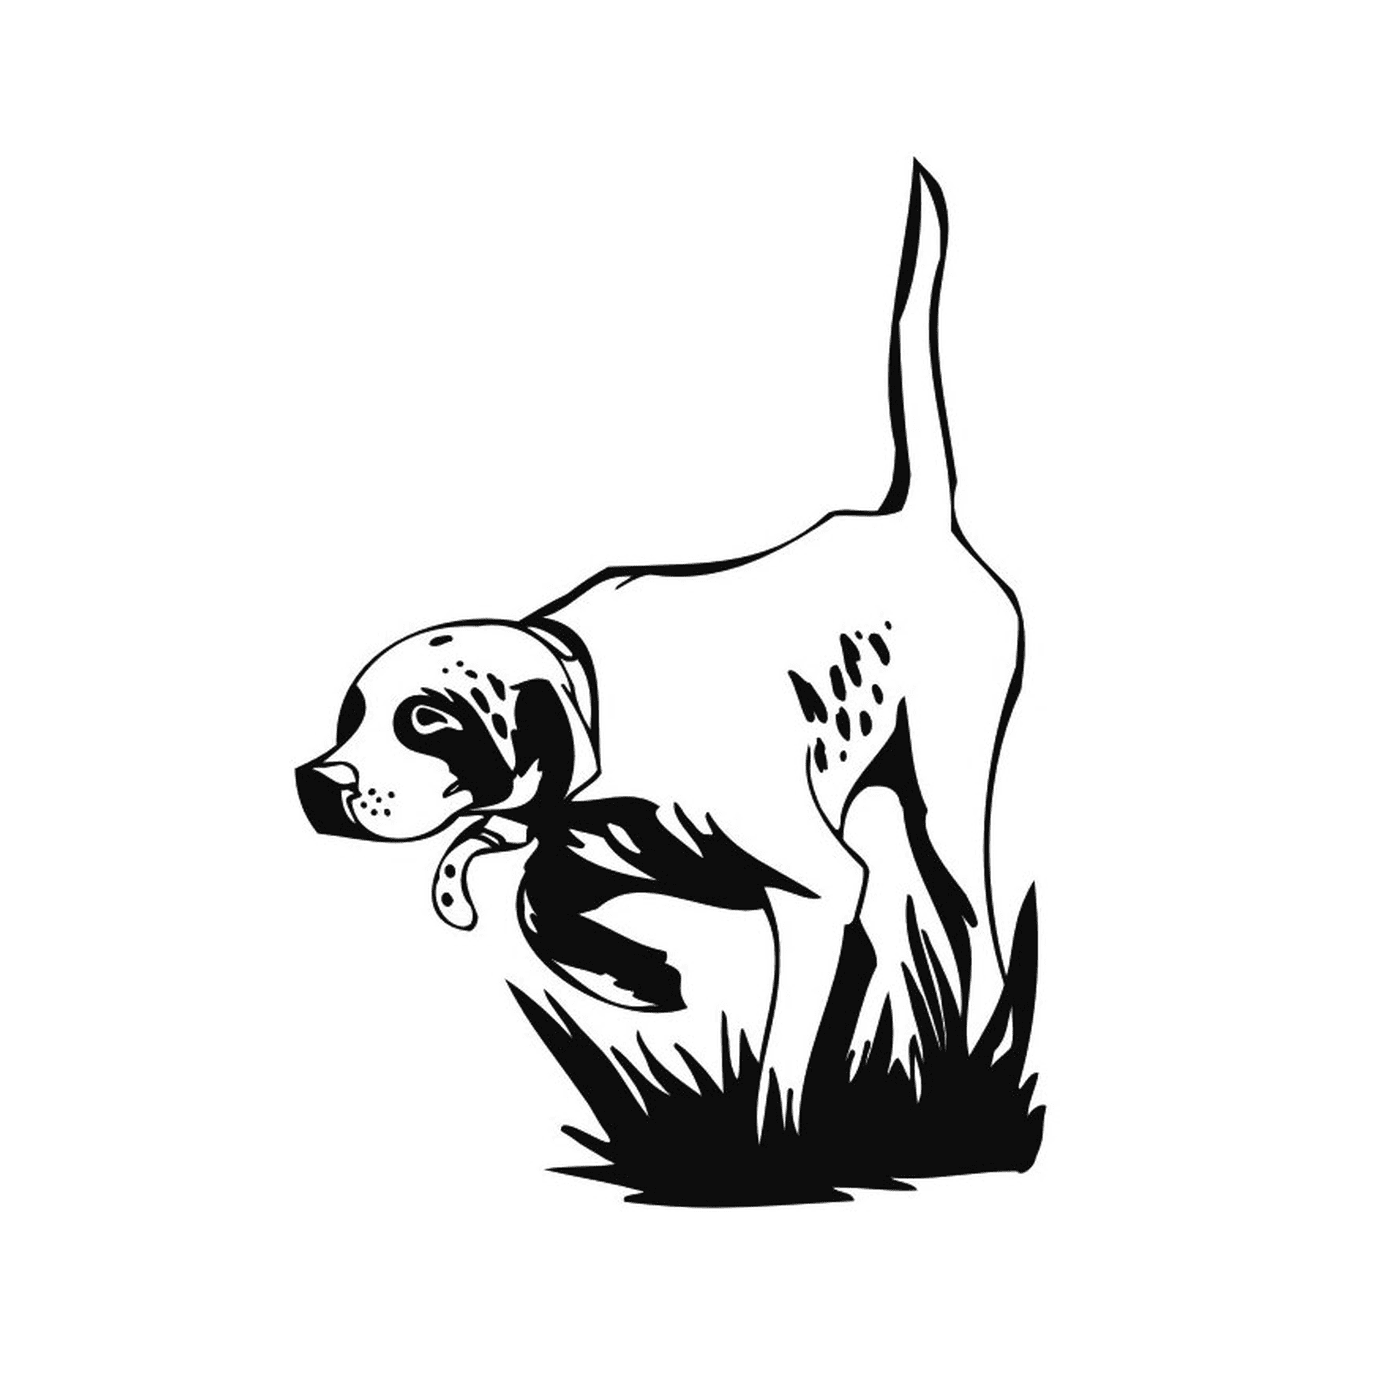  A hunting dog in a field 